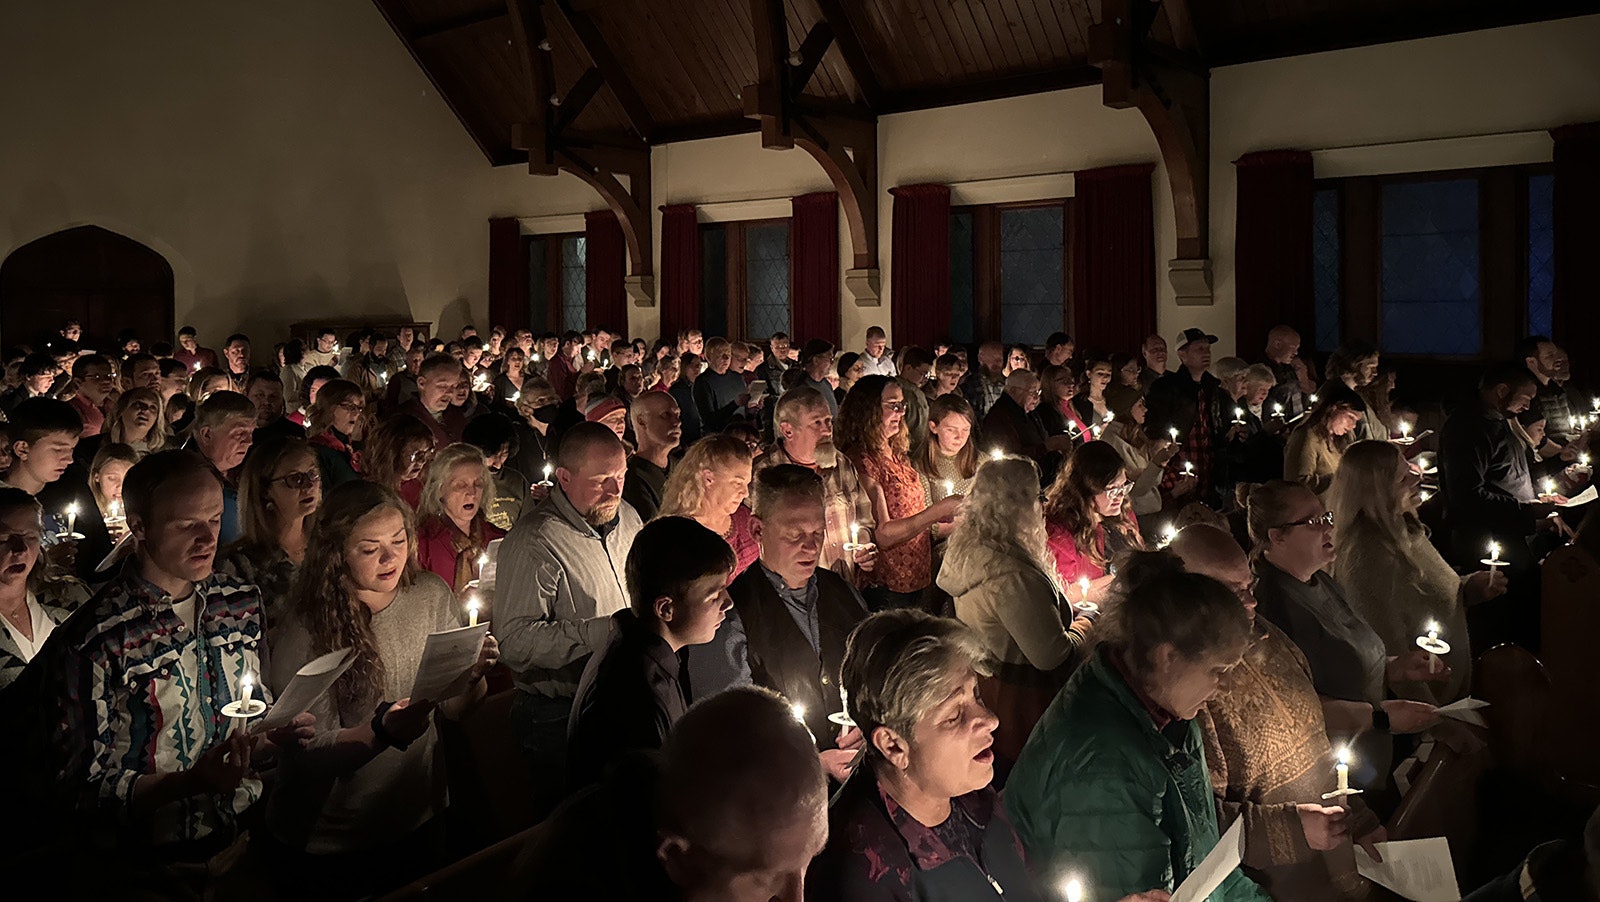 The annual candlelight service at Mammoth Hot Springs Chapel on Christmas Eve.